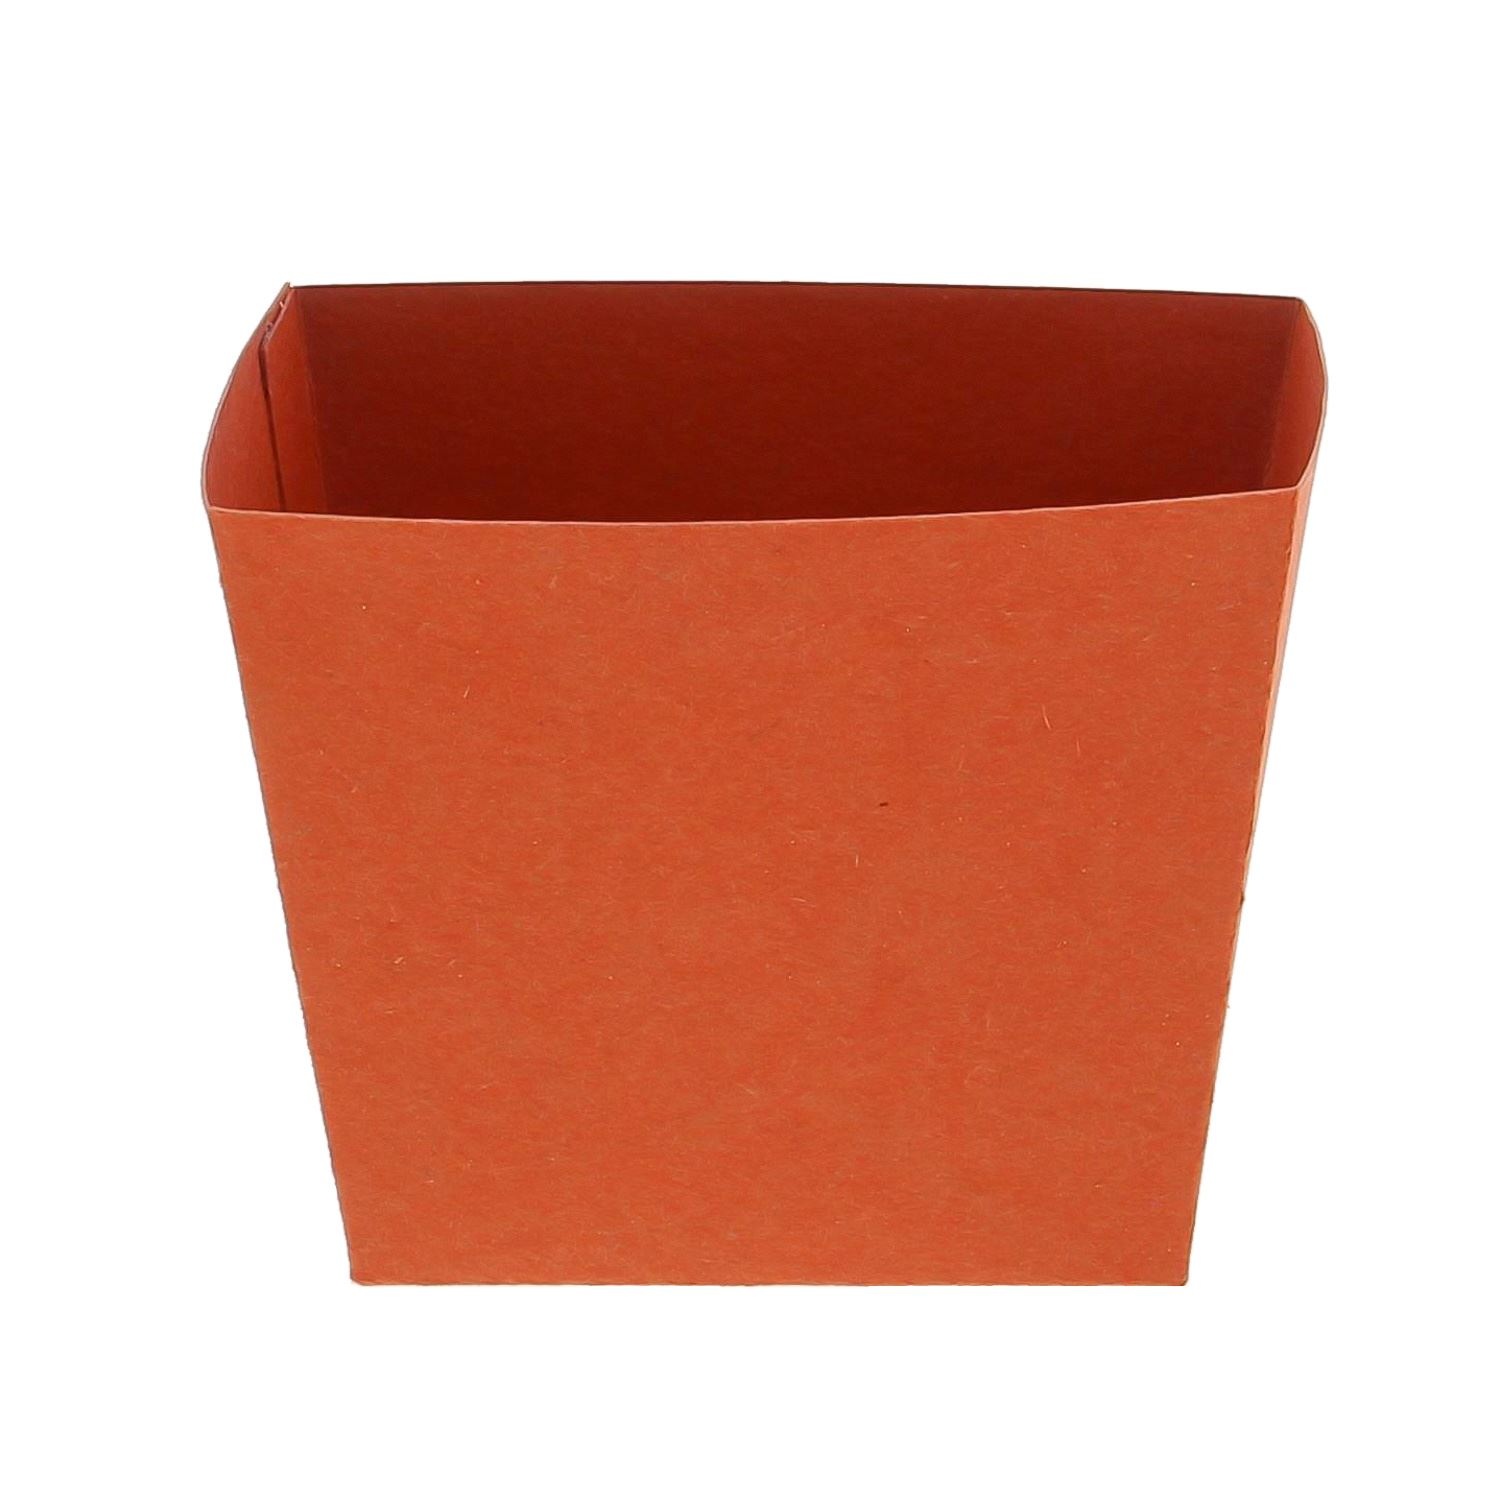 Conical tray high "Natura" dark orange - 2 sizes - 78*48*80 mm and 96*61*80 mm - 50 pieces